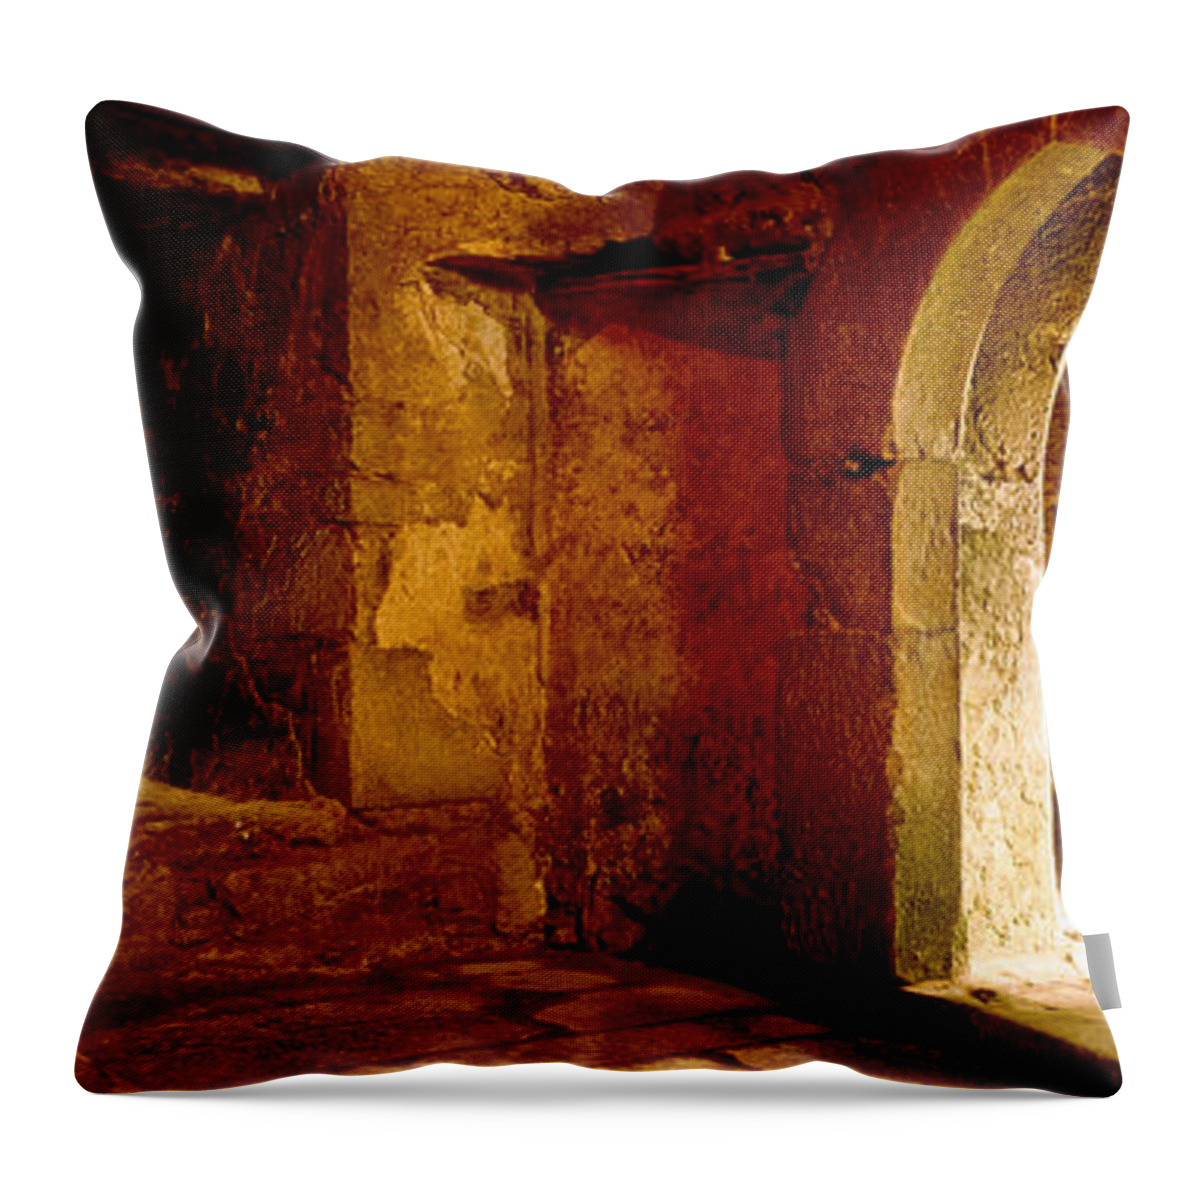 Photography Throw Pillow featuring the photograph Interiors Of A Castle, Blarney Castle by Panoramic Images